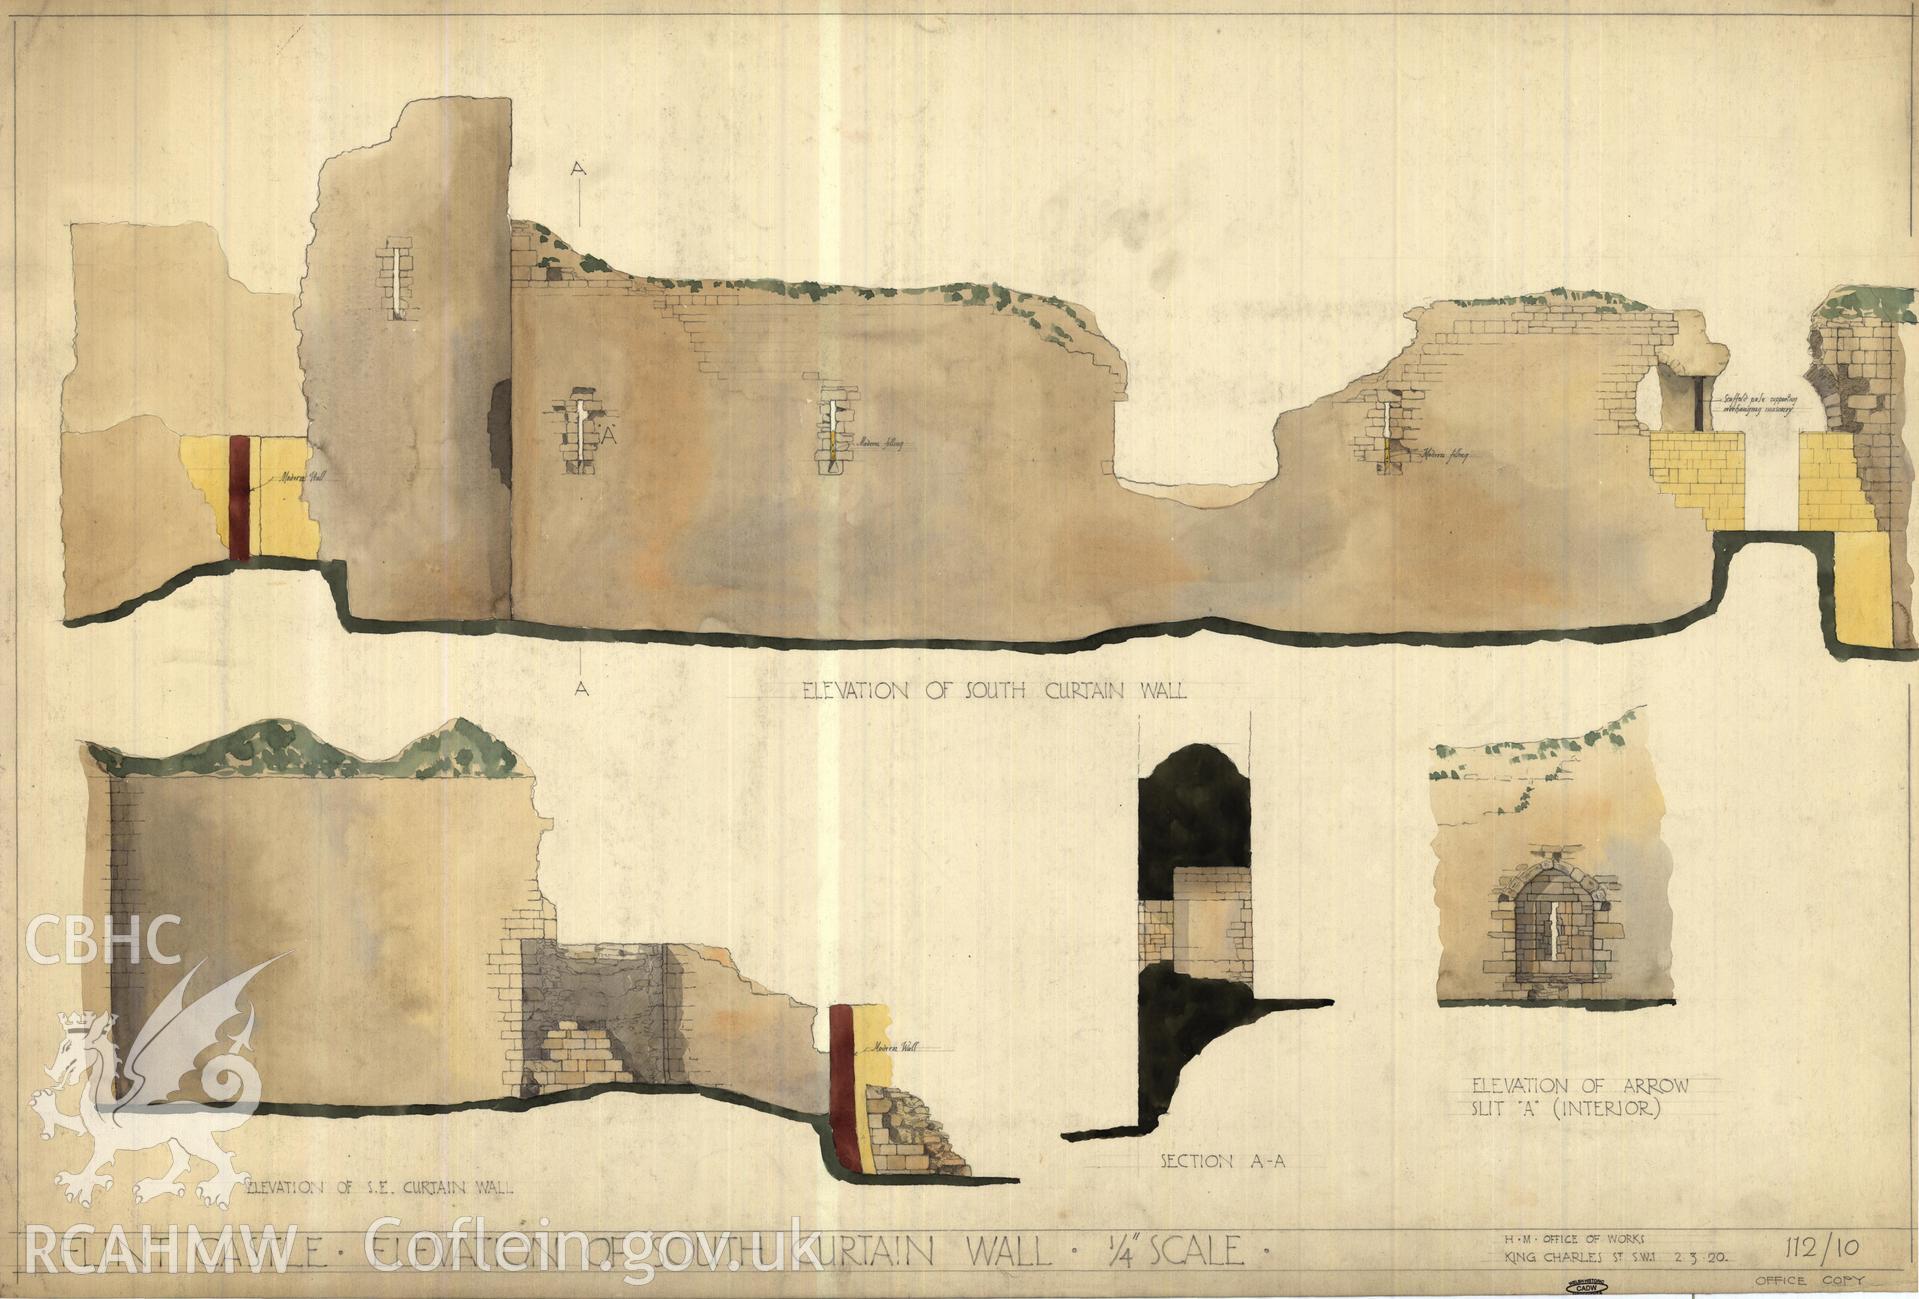 Cadw guardianship monument drawing of Flint Castle. S curtain, elev+section (tinted). Cadw Ref. No:112/10. Scale 1:48.